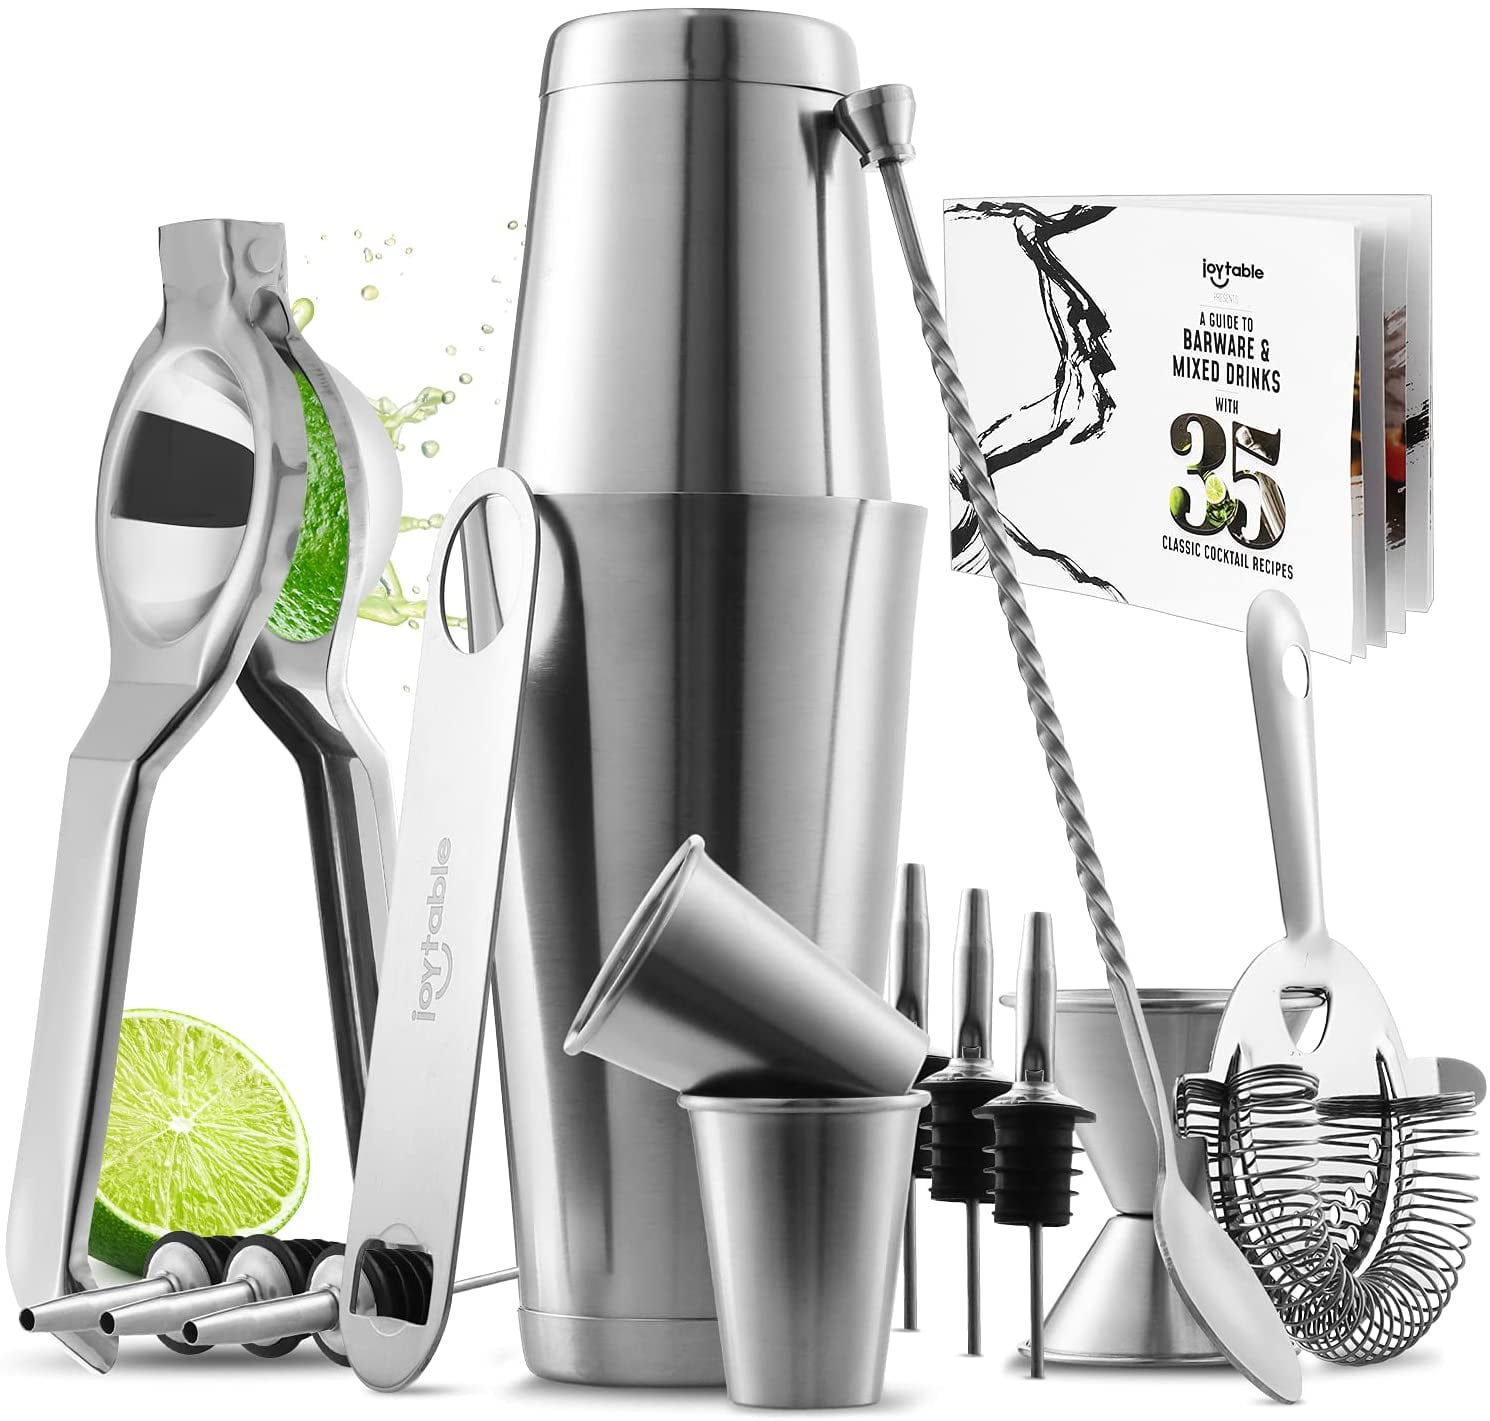 Bescita Mixing Cup Mixer with Recipe on The Side, 13.5 Compost Mixed Drink Mixer with Scale Bar Tool, Junior Bartender Kit, Barware for Mixed Drinks.